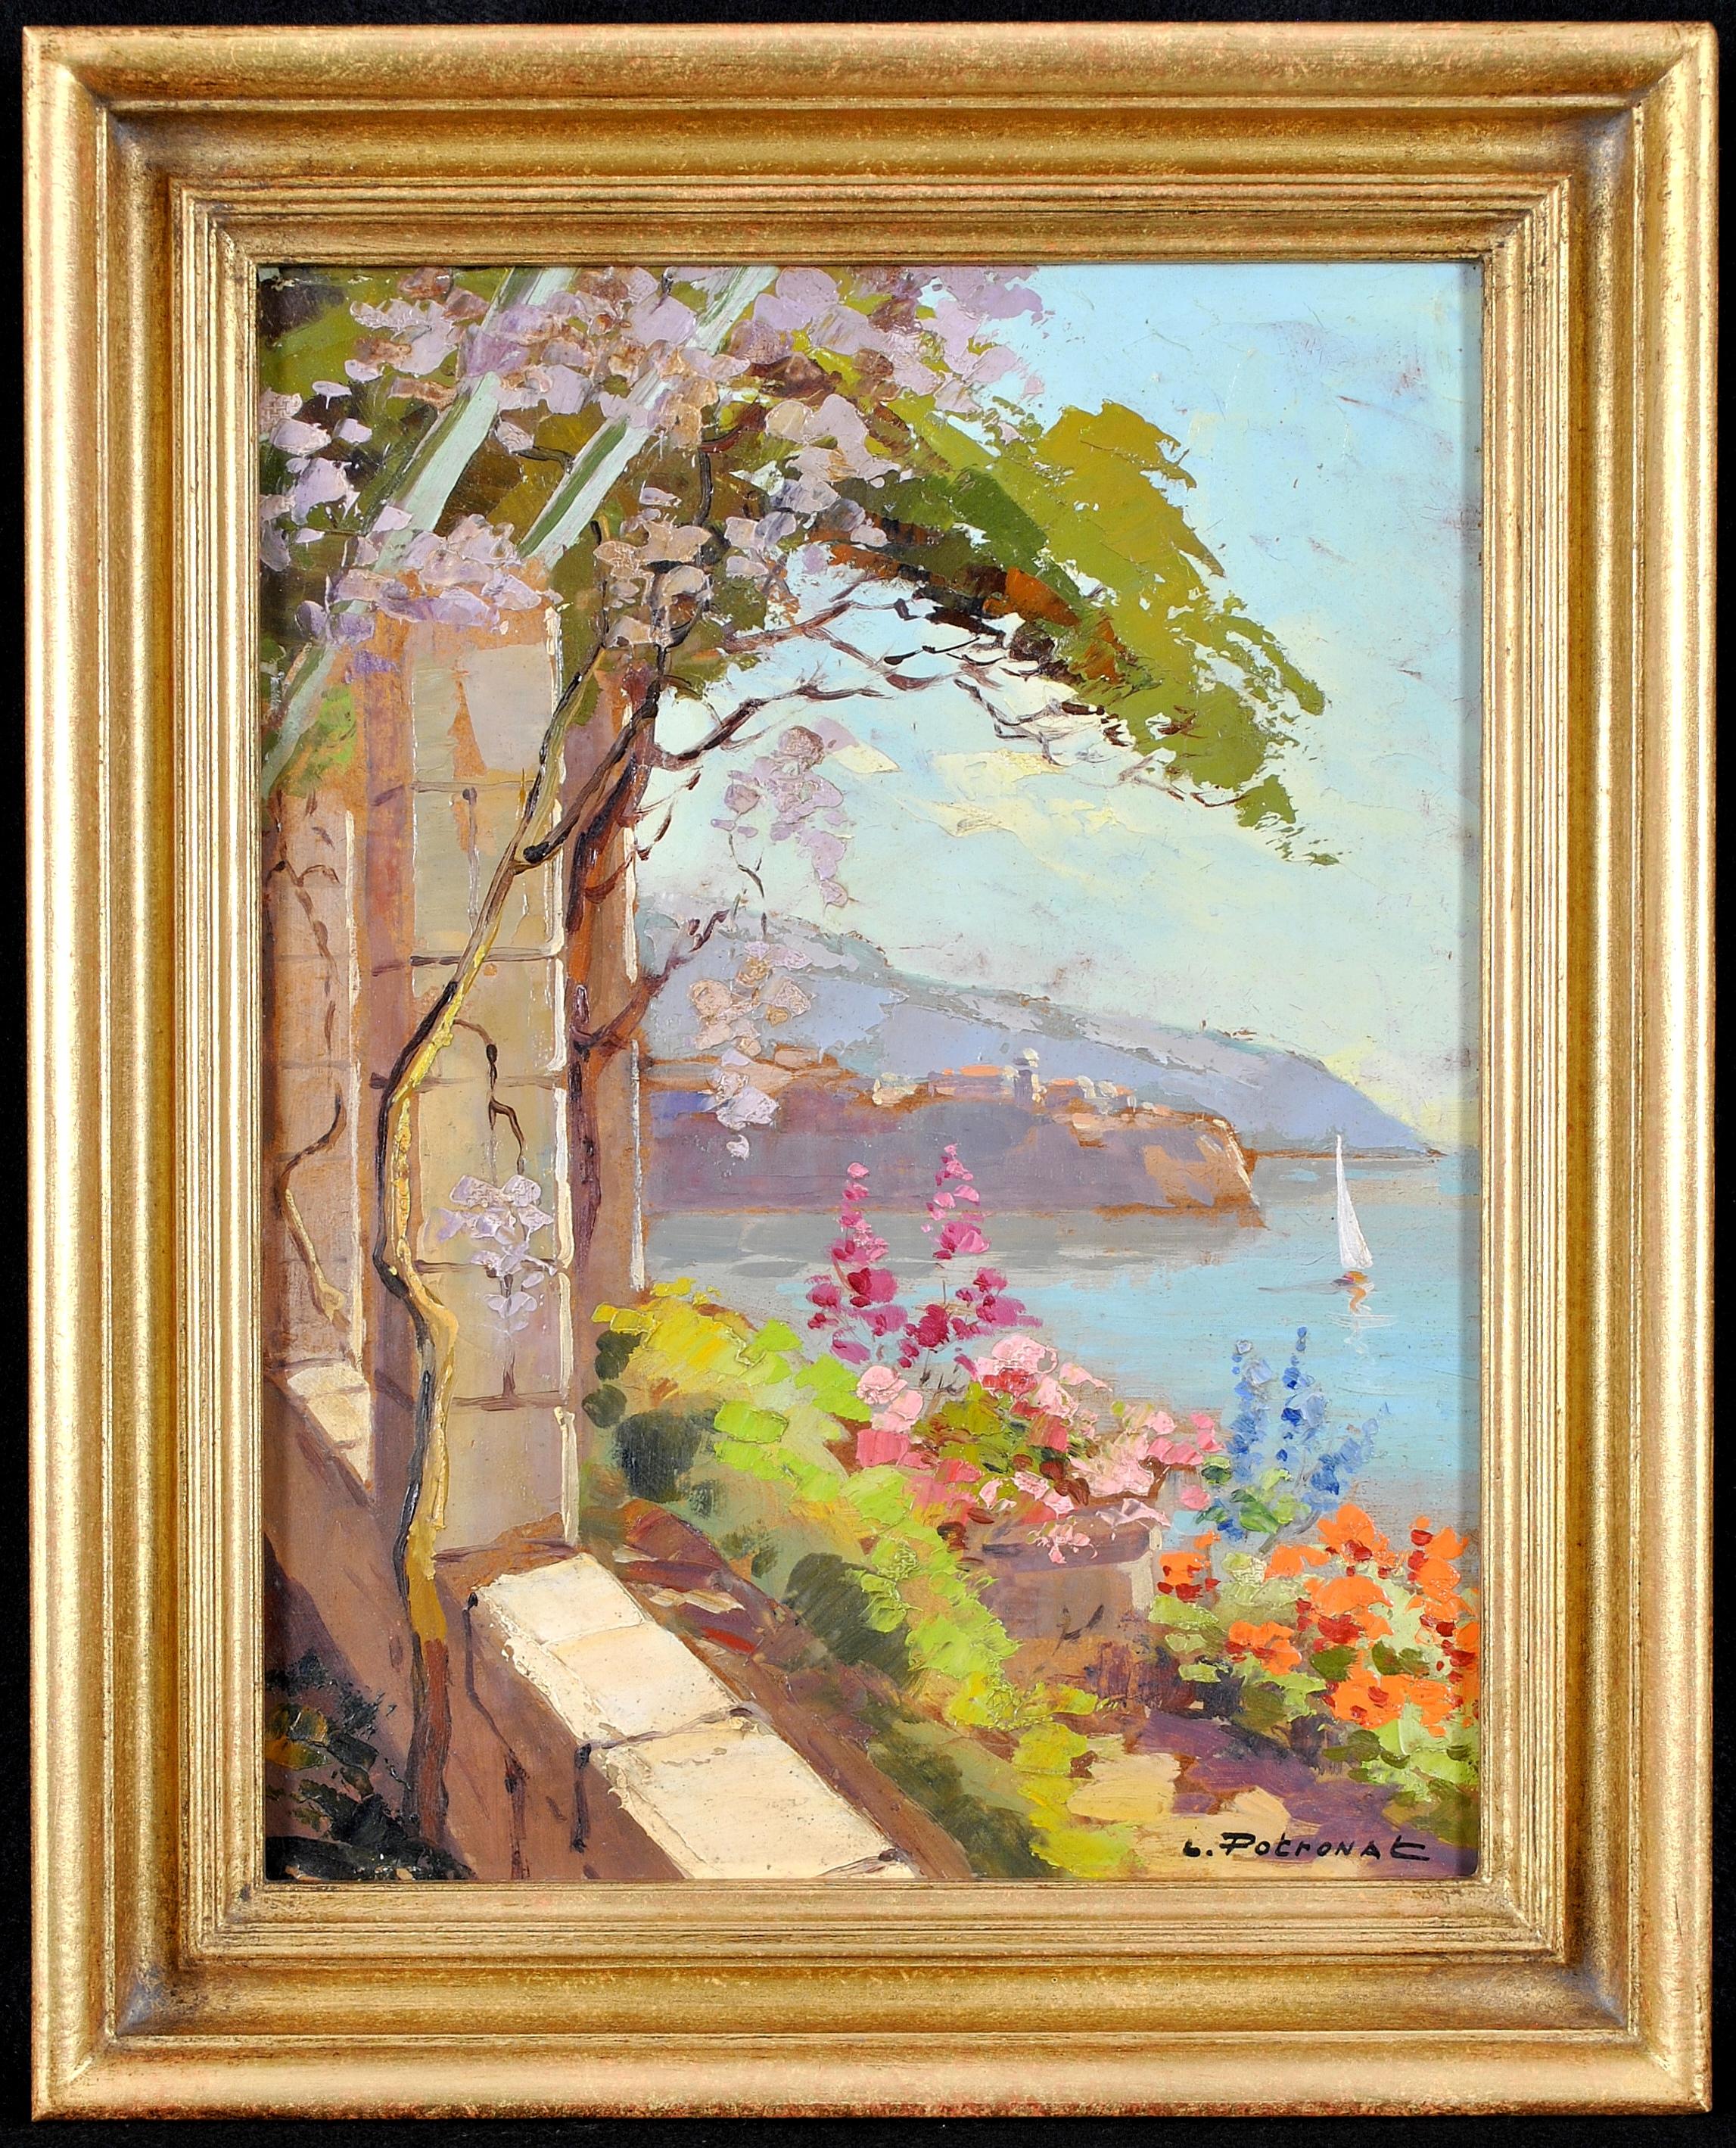 Cote d'Azur - French Riviera from Balcony Coastal Impressionist Oil Painting